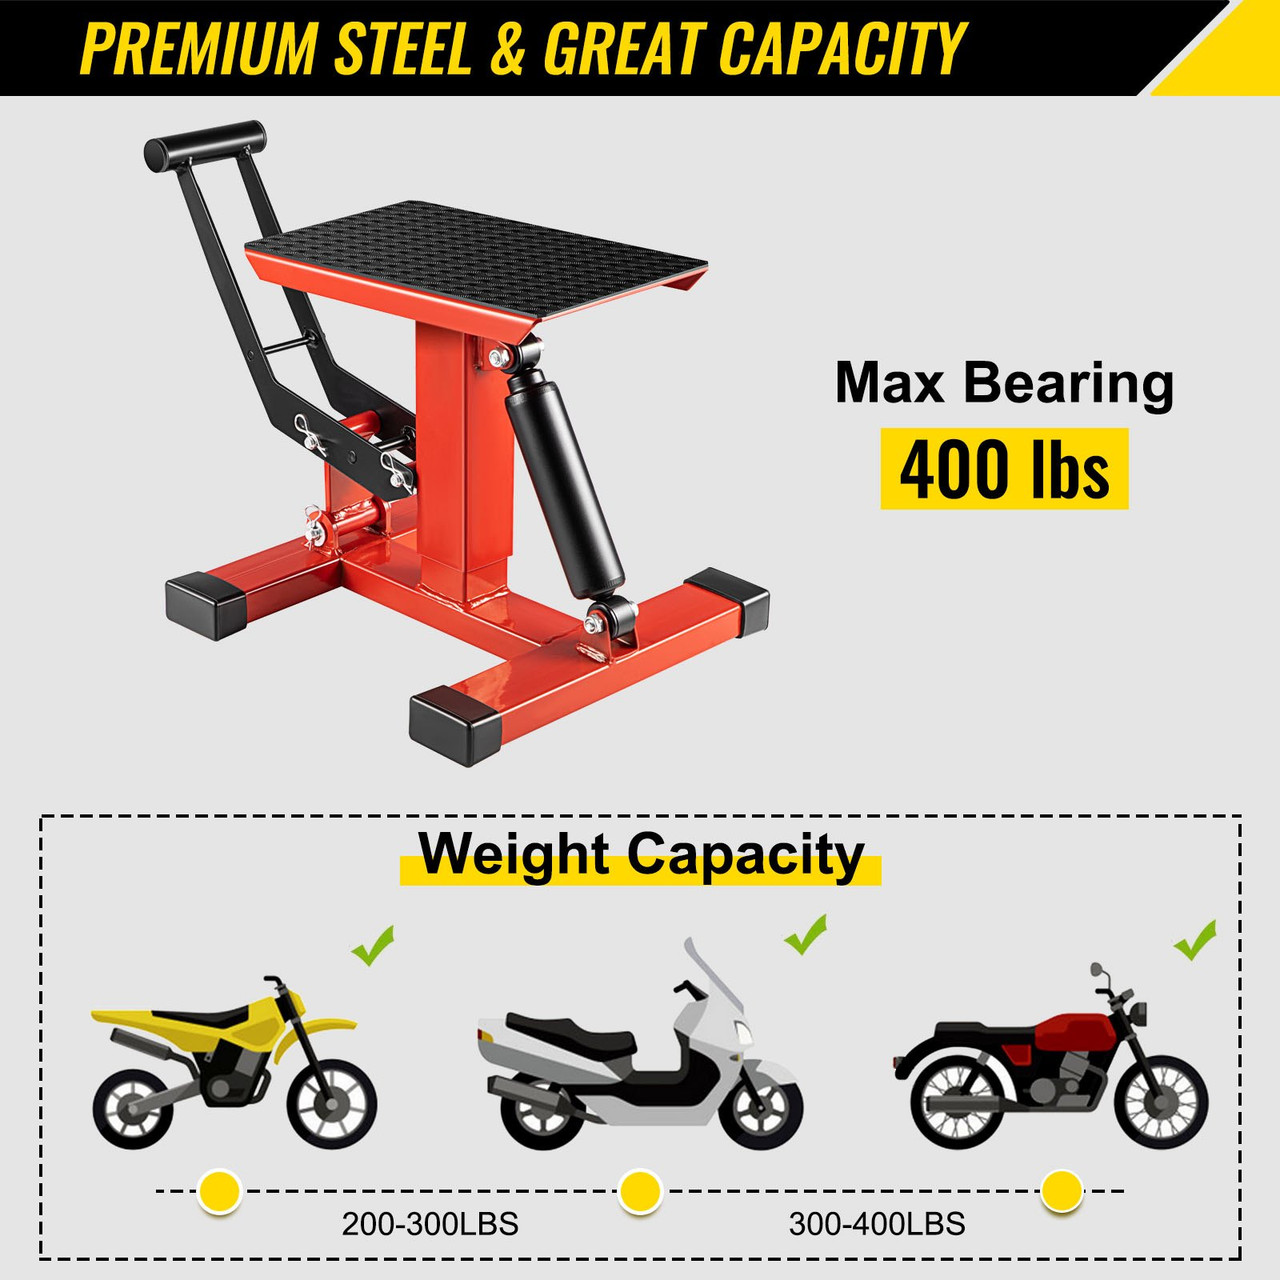 Motorcycle Dirt Bike Lift Stand, 400 Lbs Heavy Duty Motorcycle Lift Repair Stand, 9.0"-16.5" Adjustable Steel Lift Stand Dirt Bike Maintenance Table Rack, Red/Black Jack Hoist Height Lift Stand